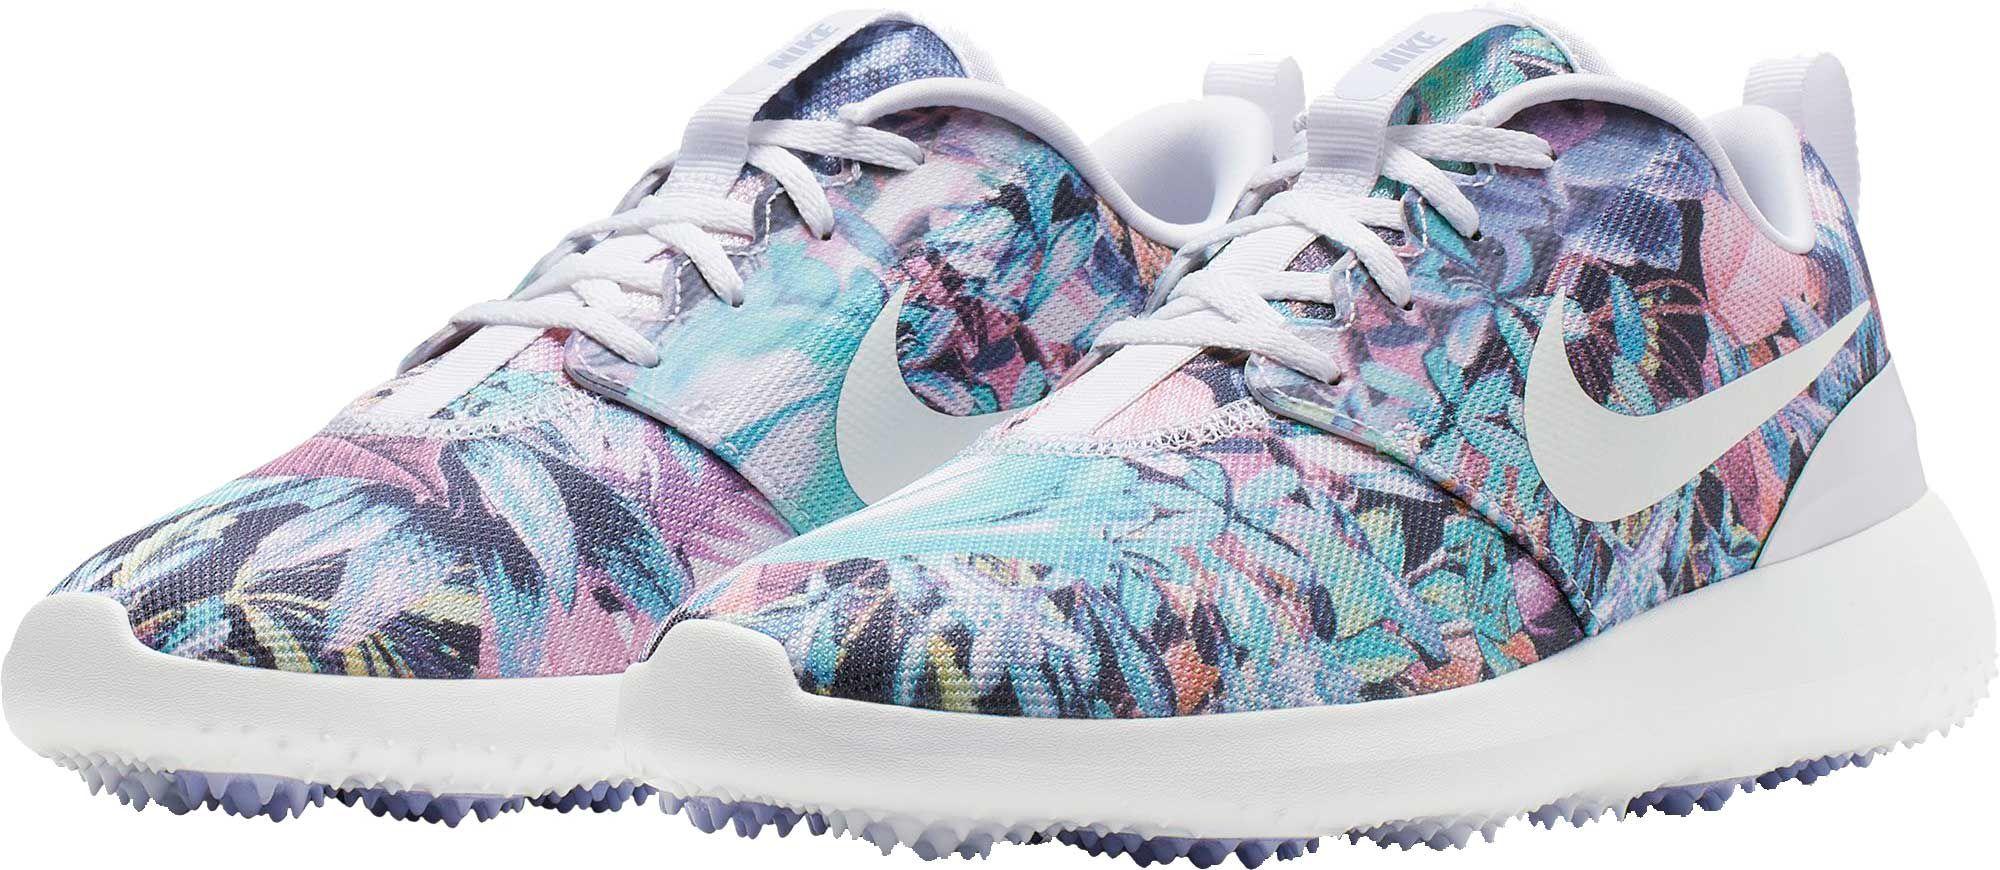 nike golf floral shoes